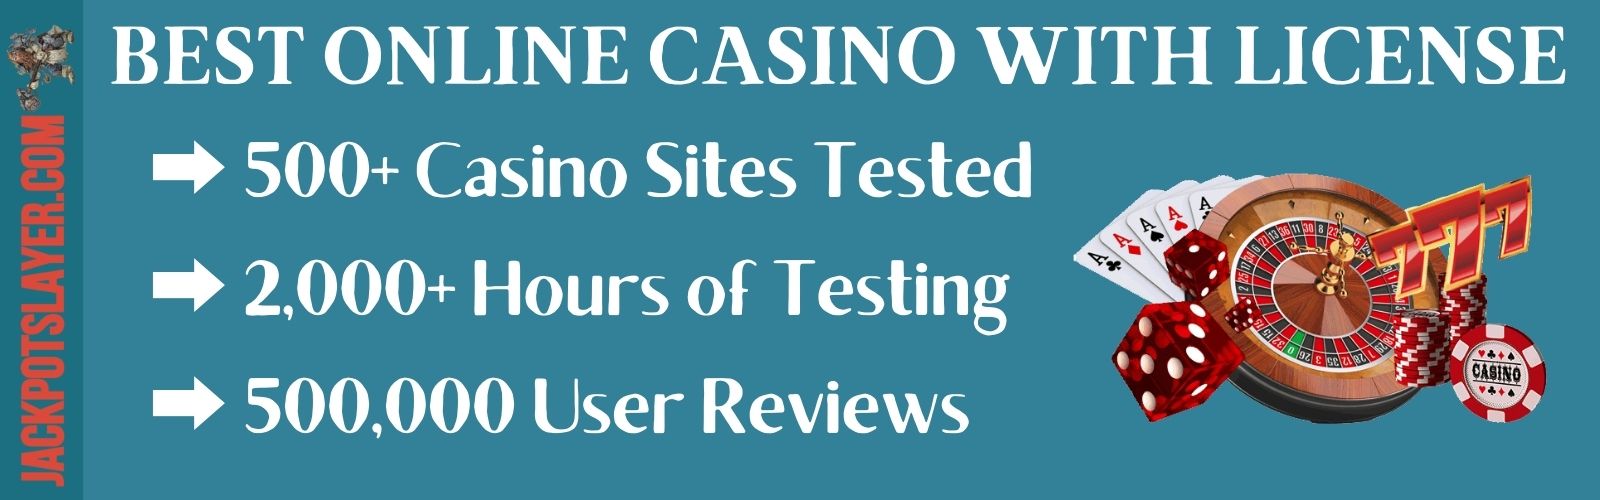 Online Casino with License